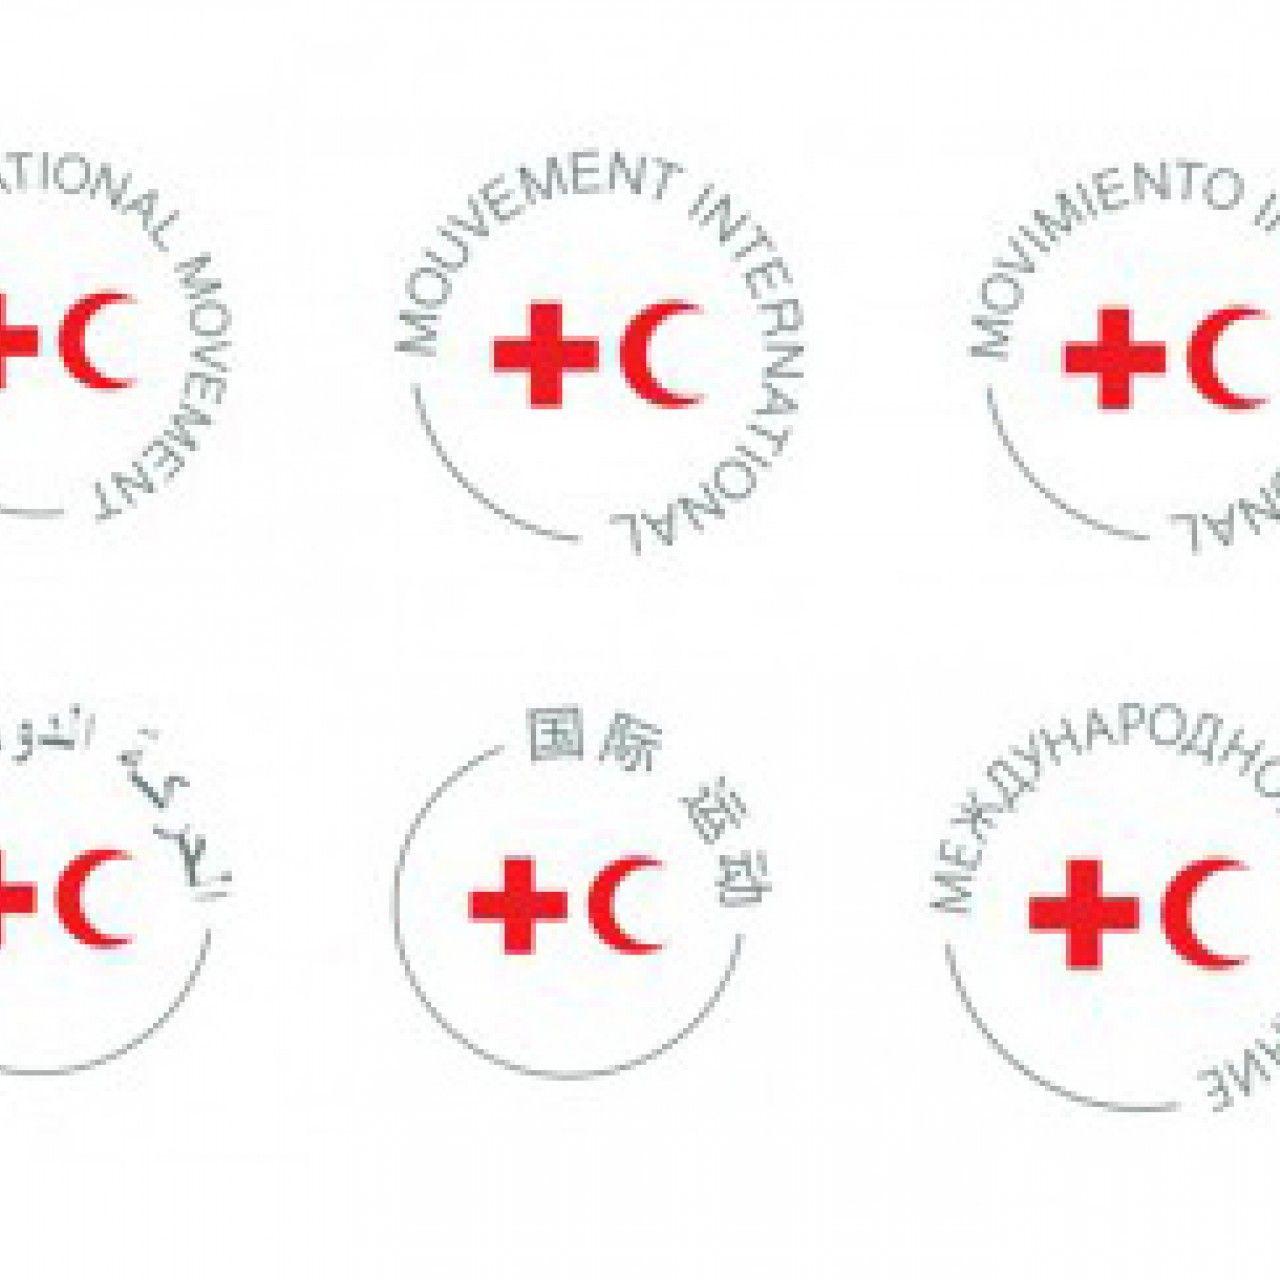 Movement Logo - A logo for the International Red Cross and Red Crescent Movement ...